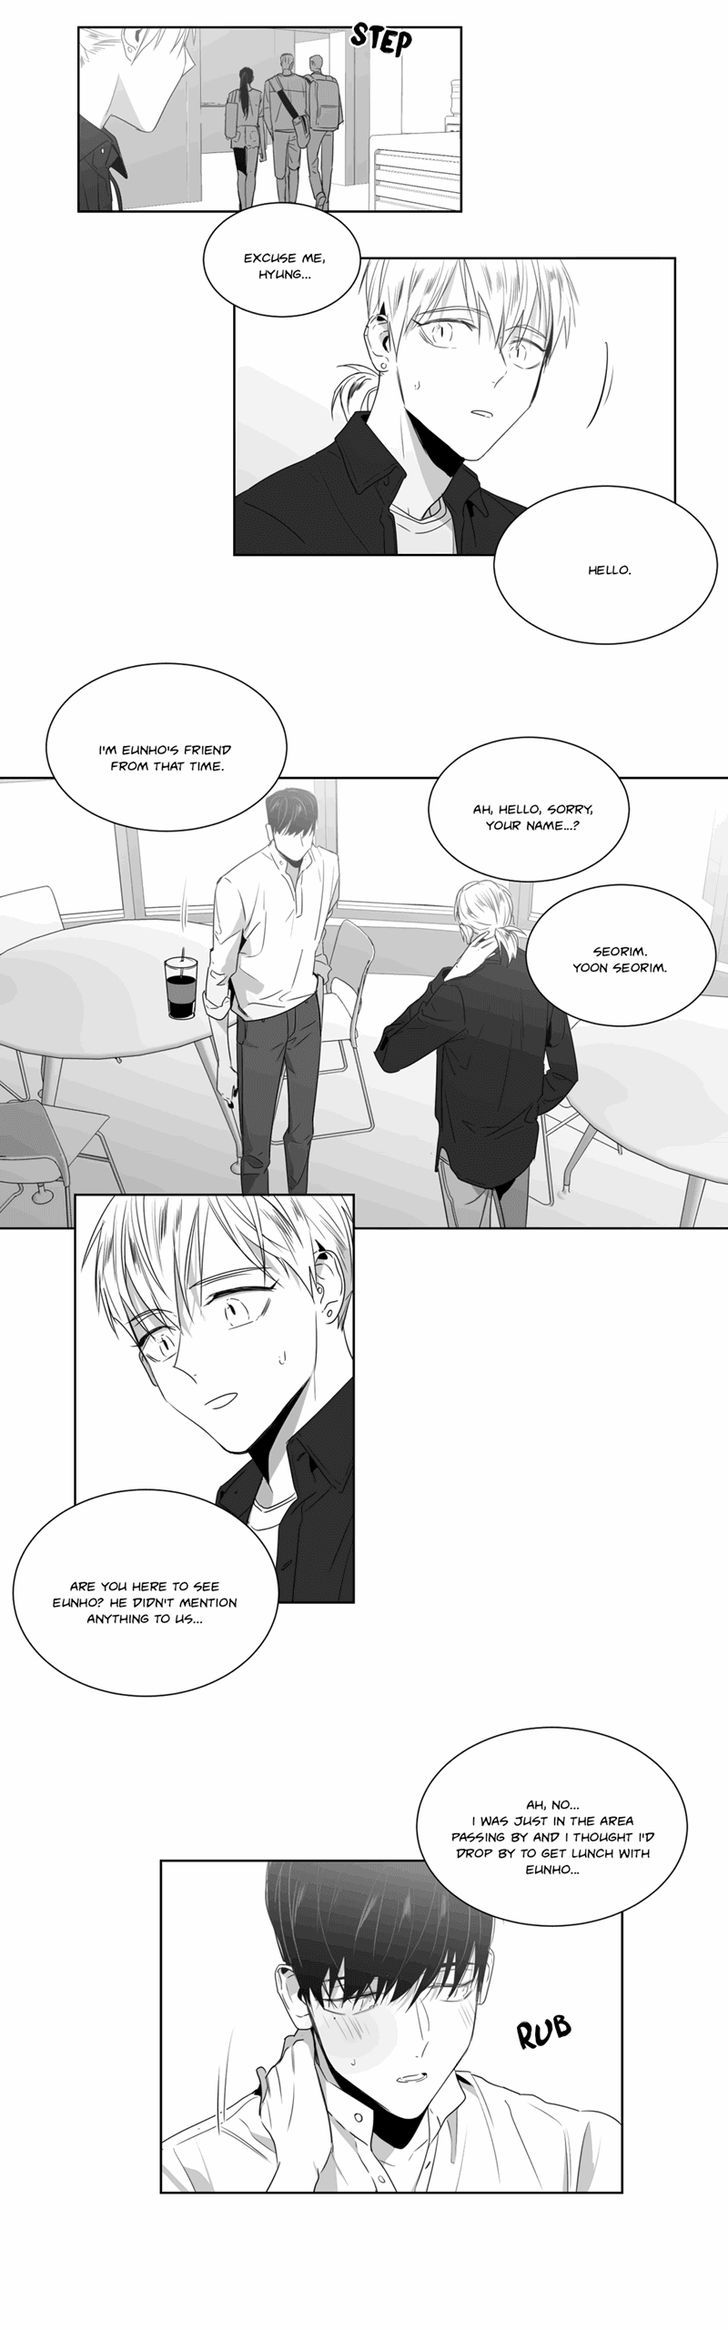 Lover Boy (Lezhin) Chapter 038 page 3